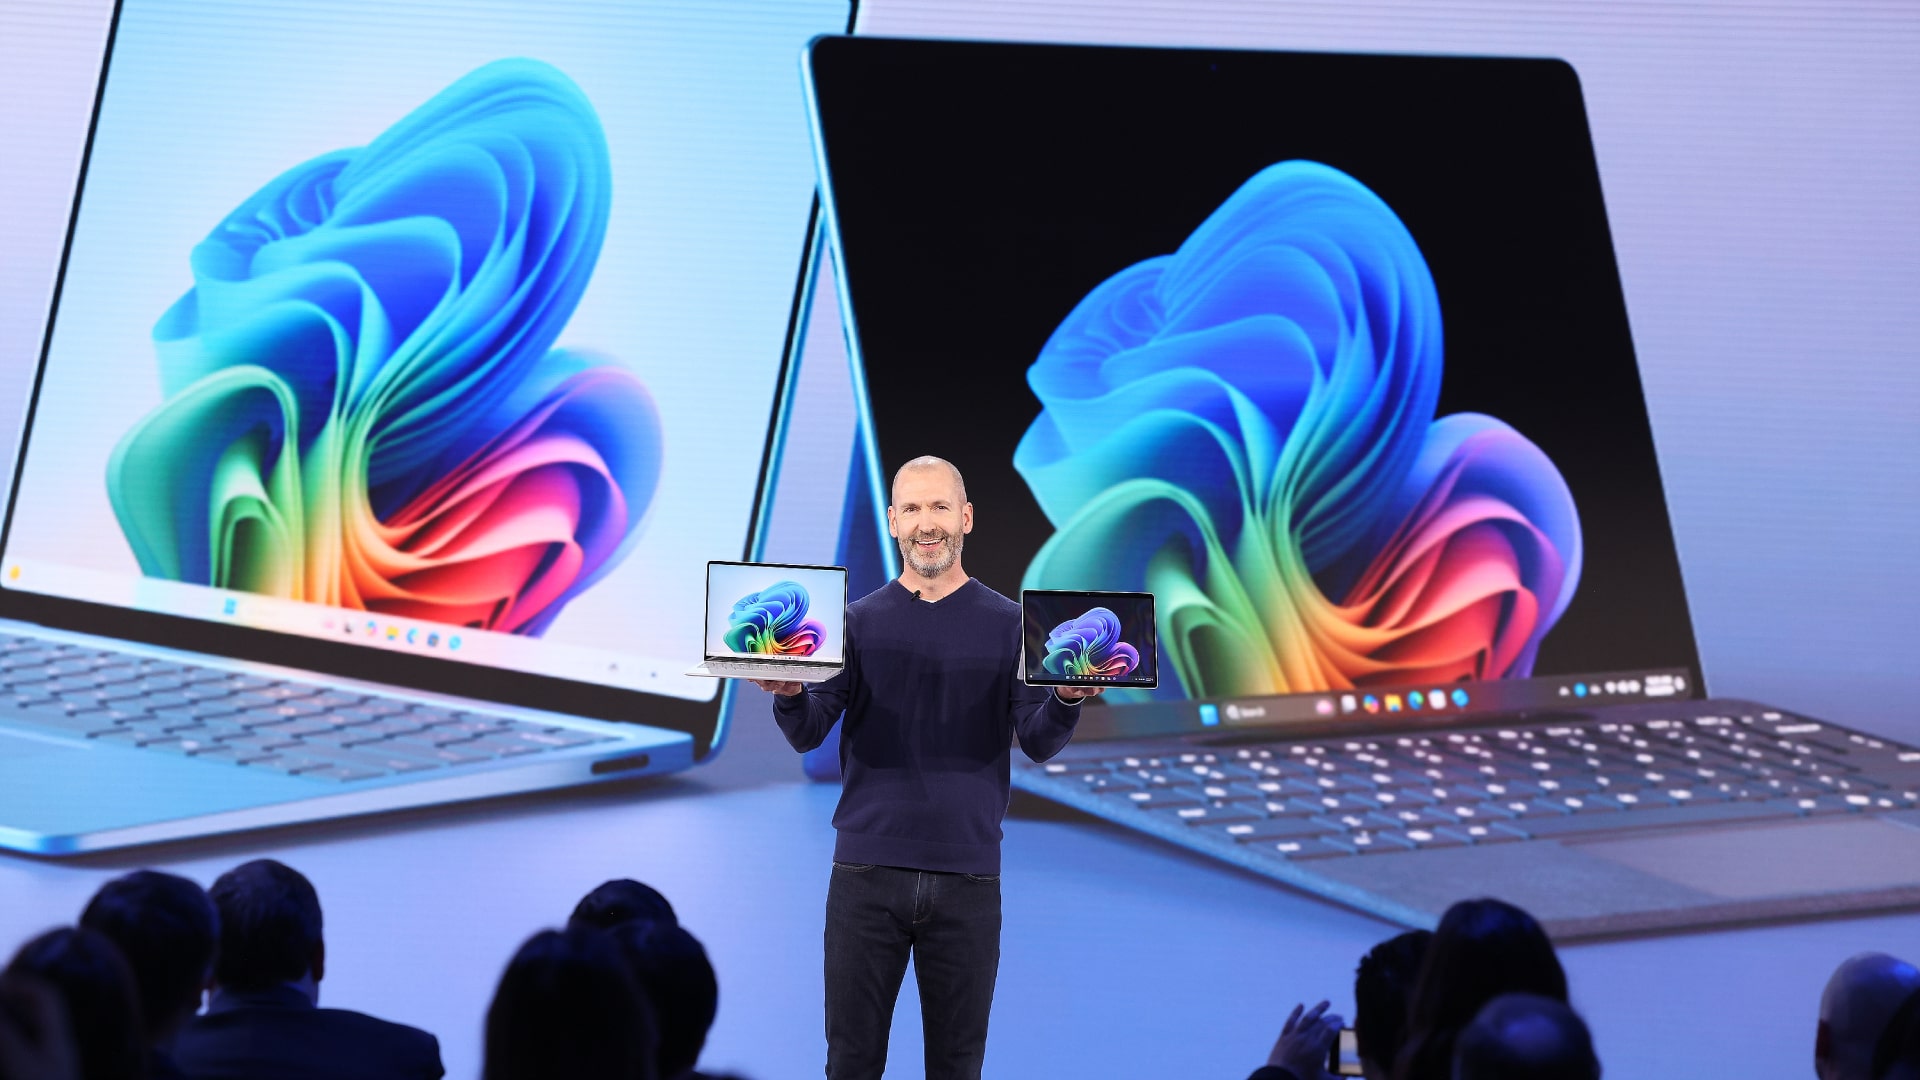 Microsoft presenting Surface Laptop and Surface Pro devices.